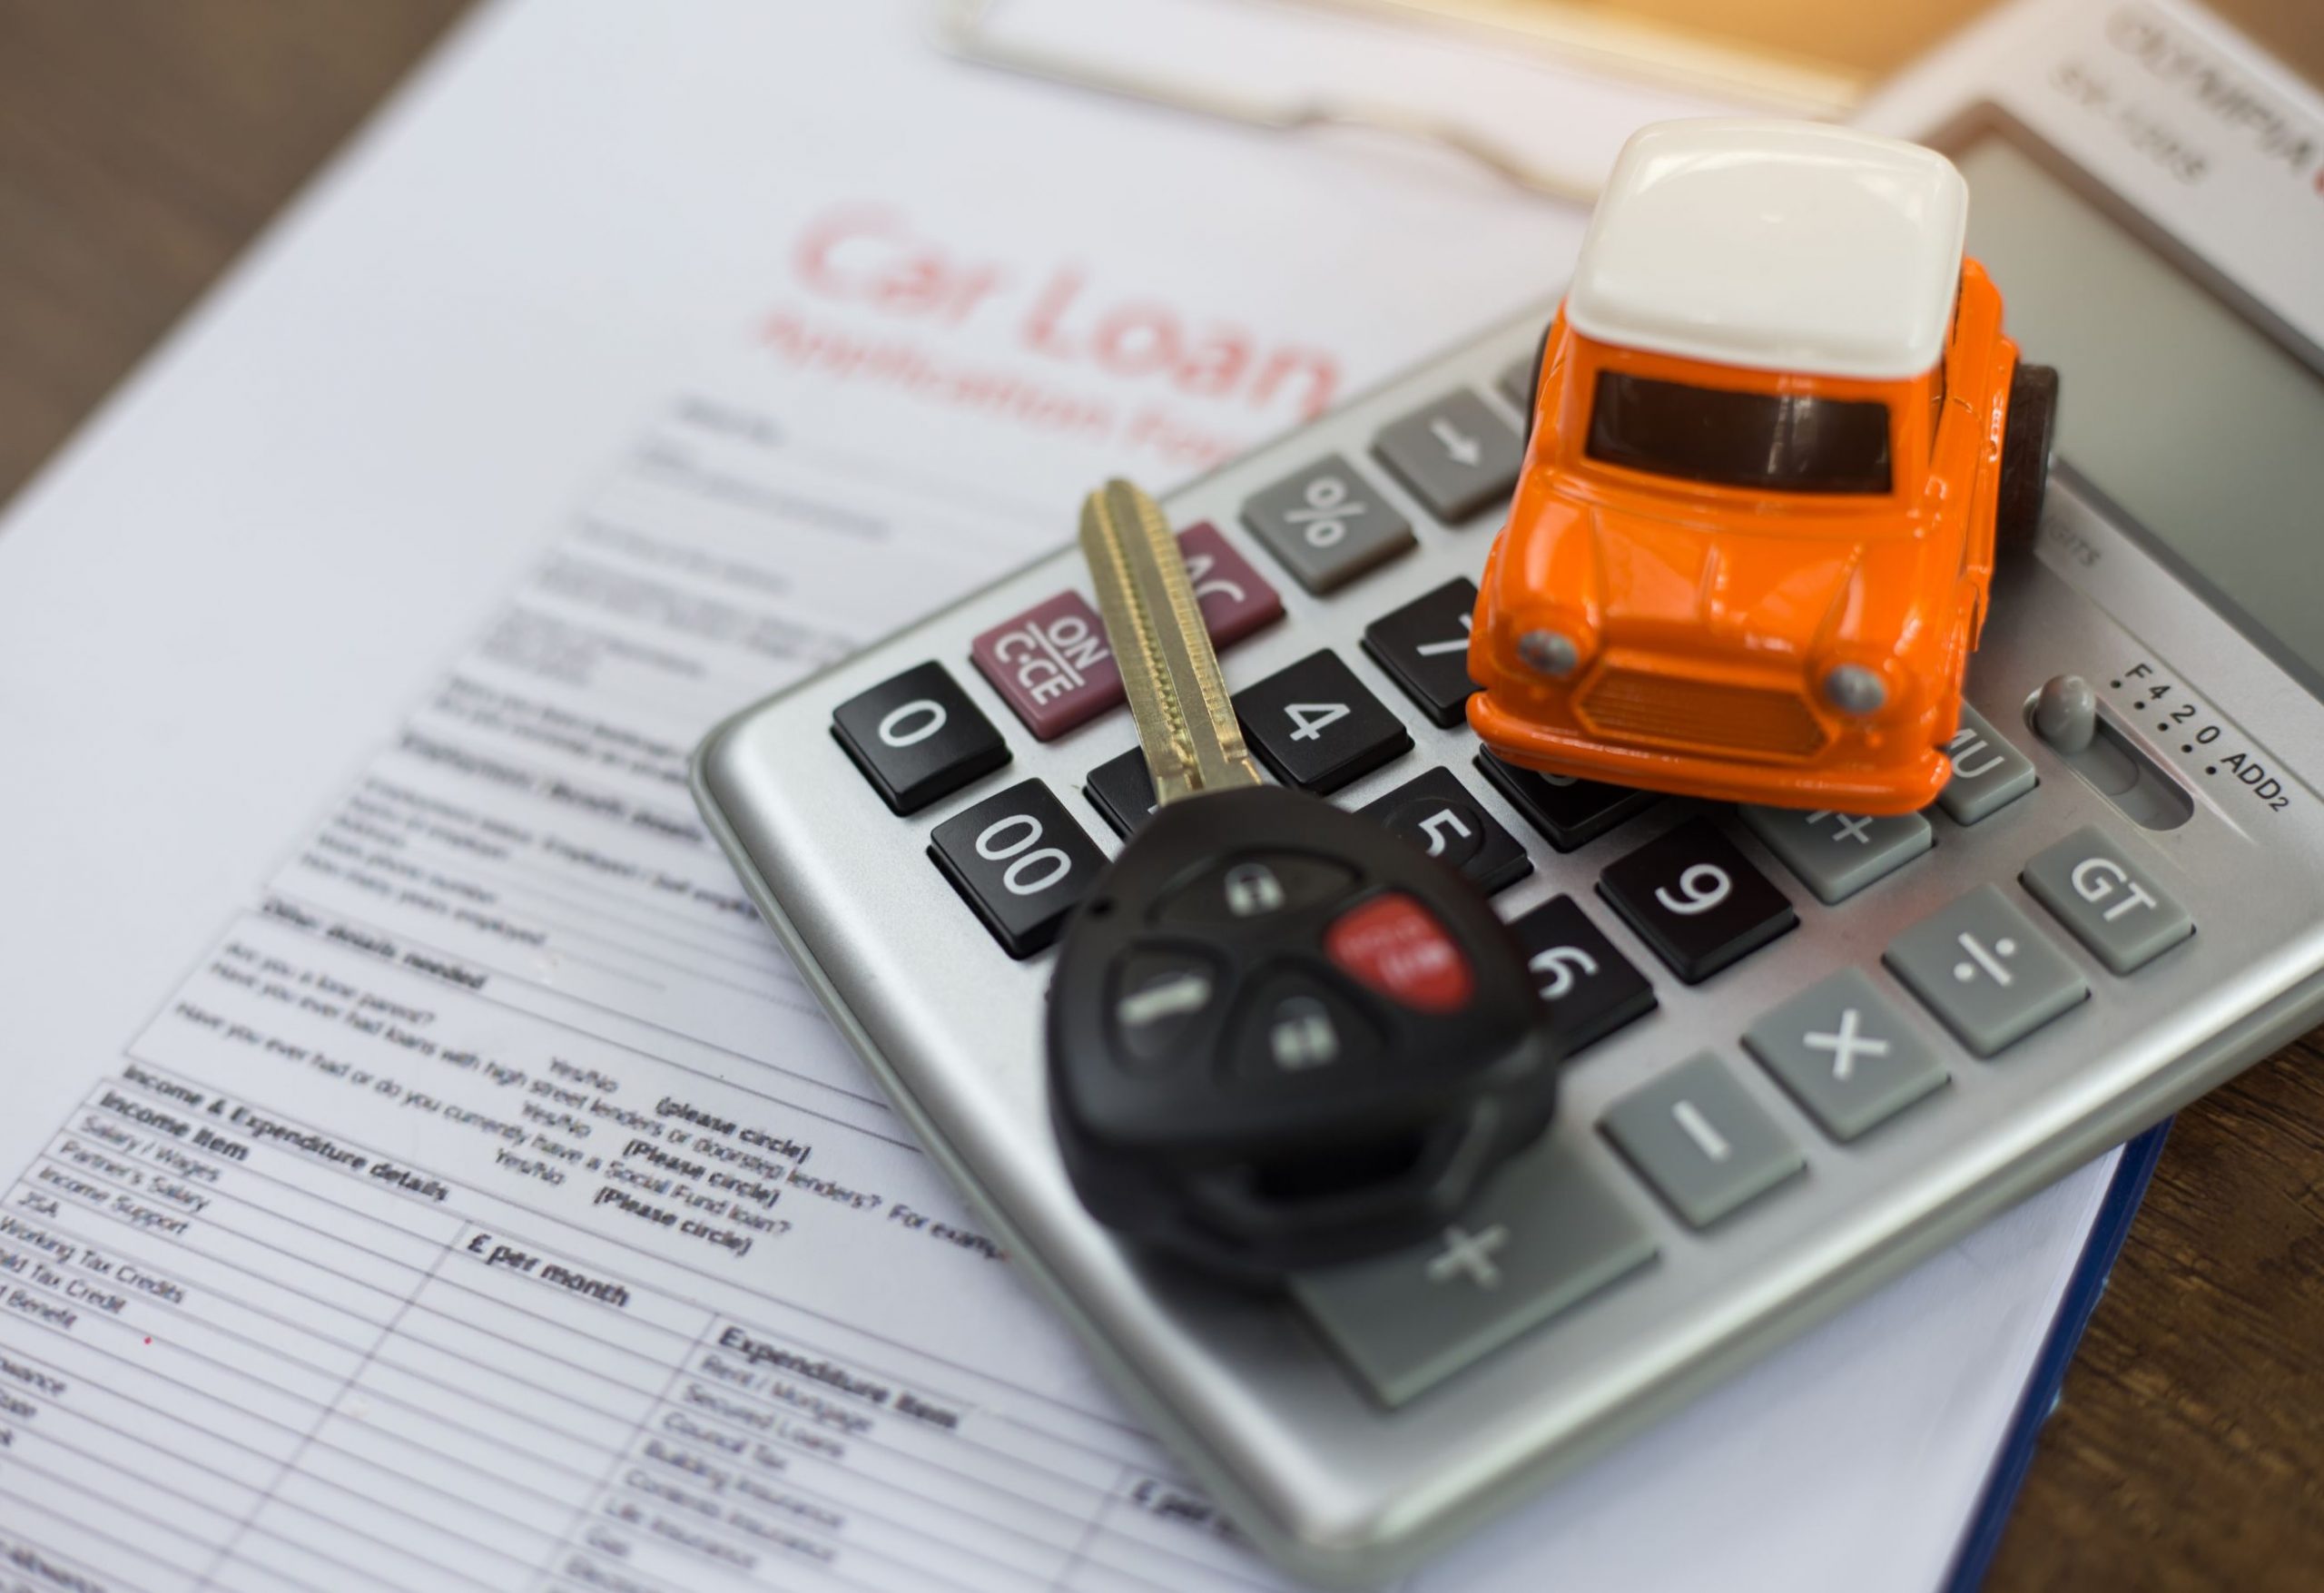 Toy car and car keys on top of calculator and finance agreement